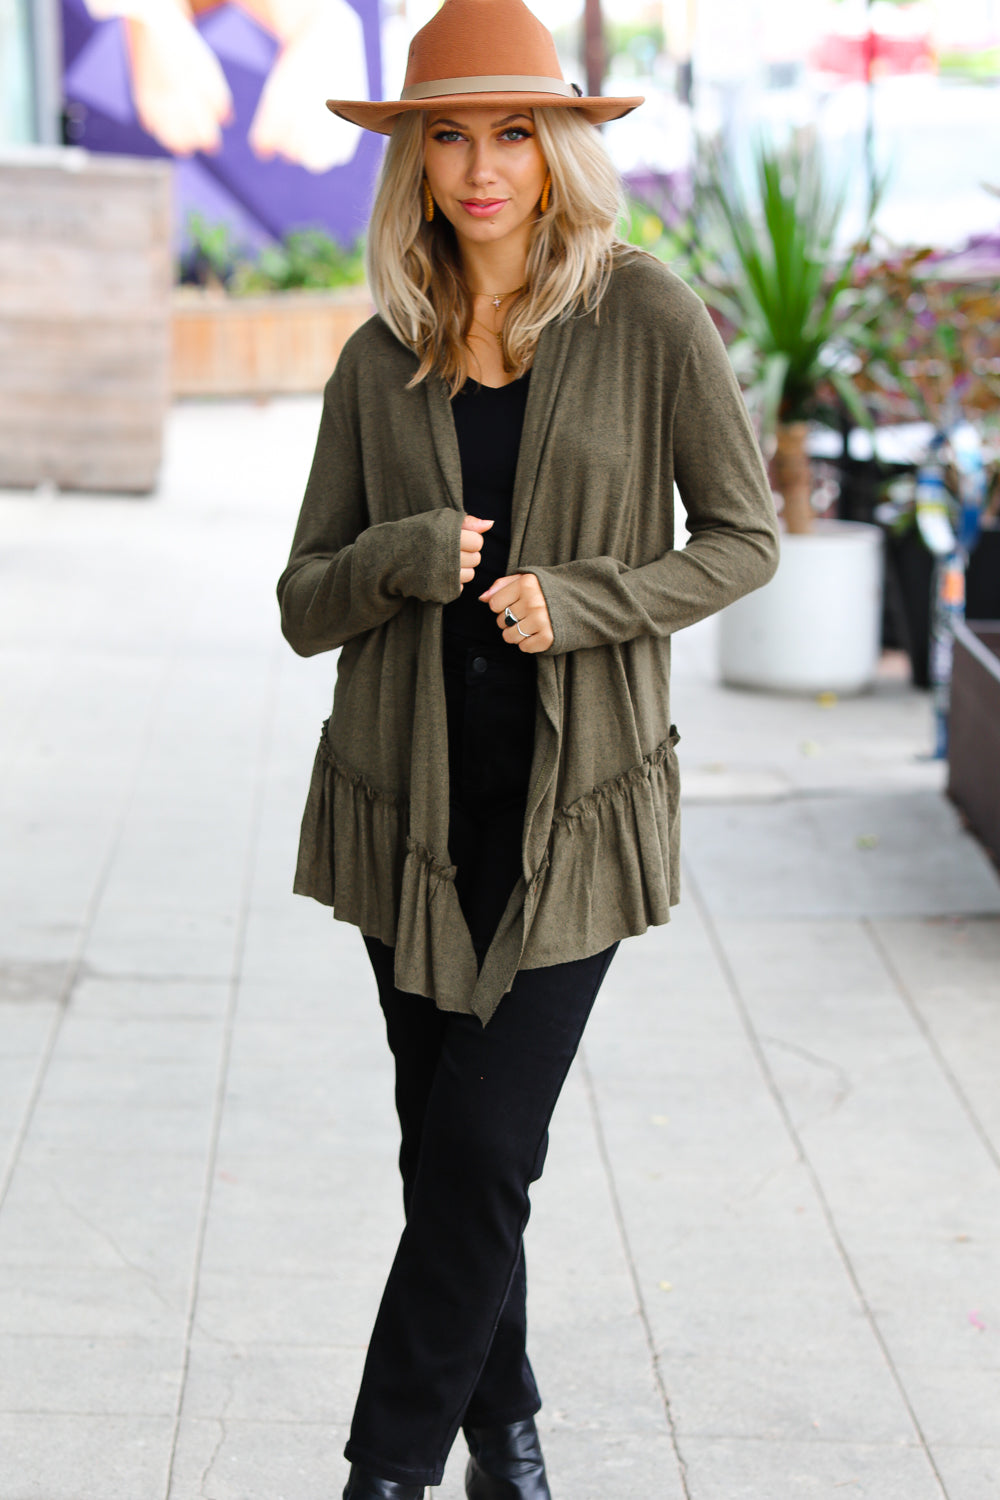 Love The Day - Olive Two-Tone Cardigan